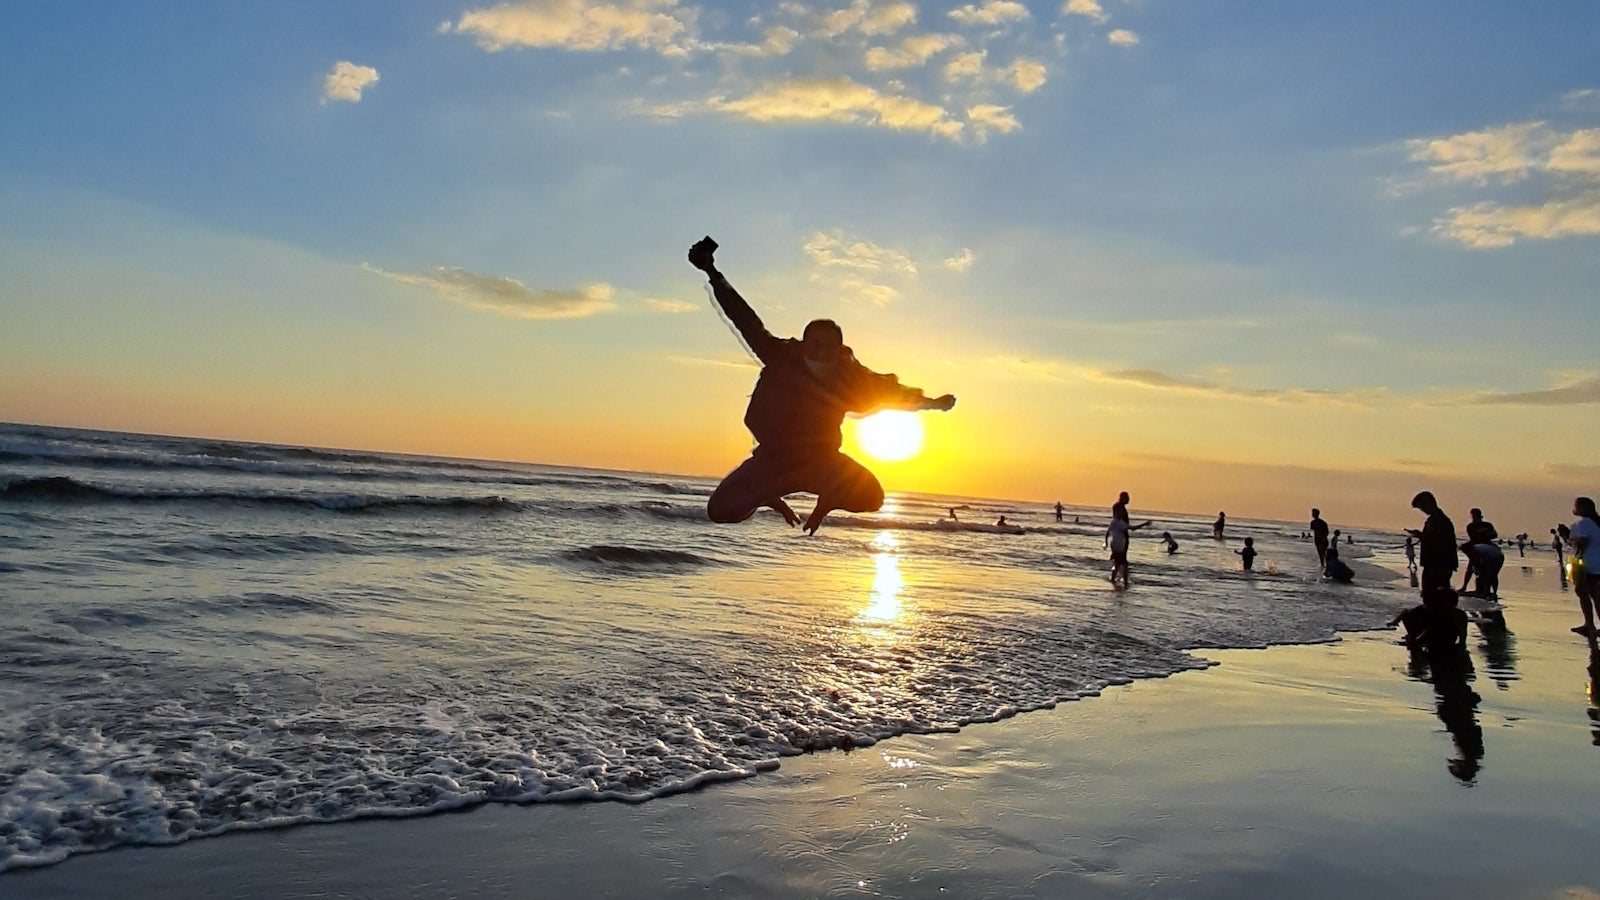 Neil's jumping during his run on the beach in Bali